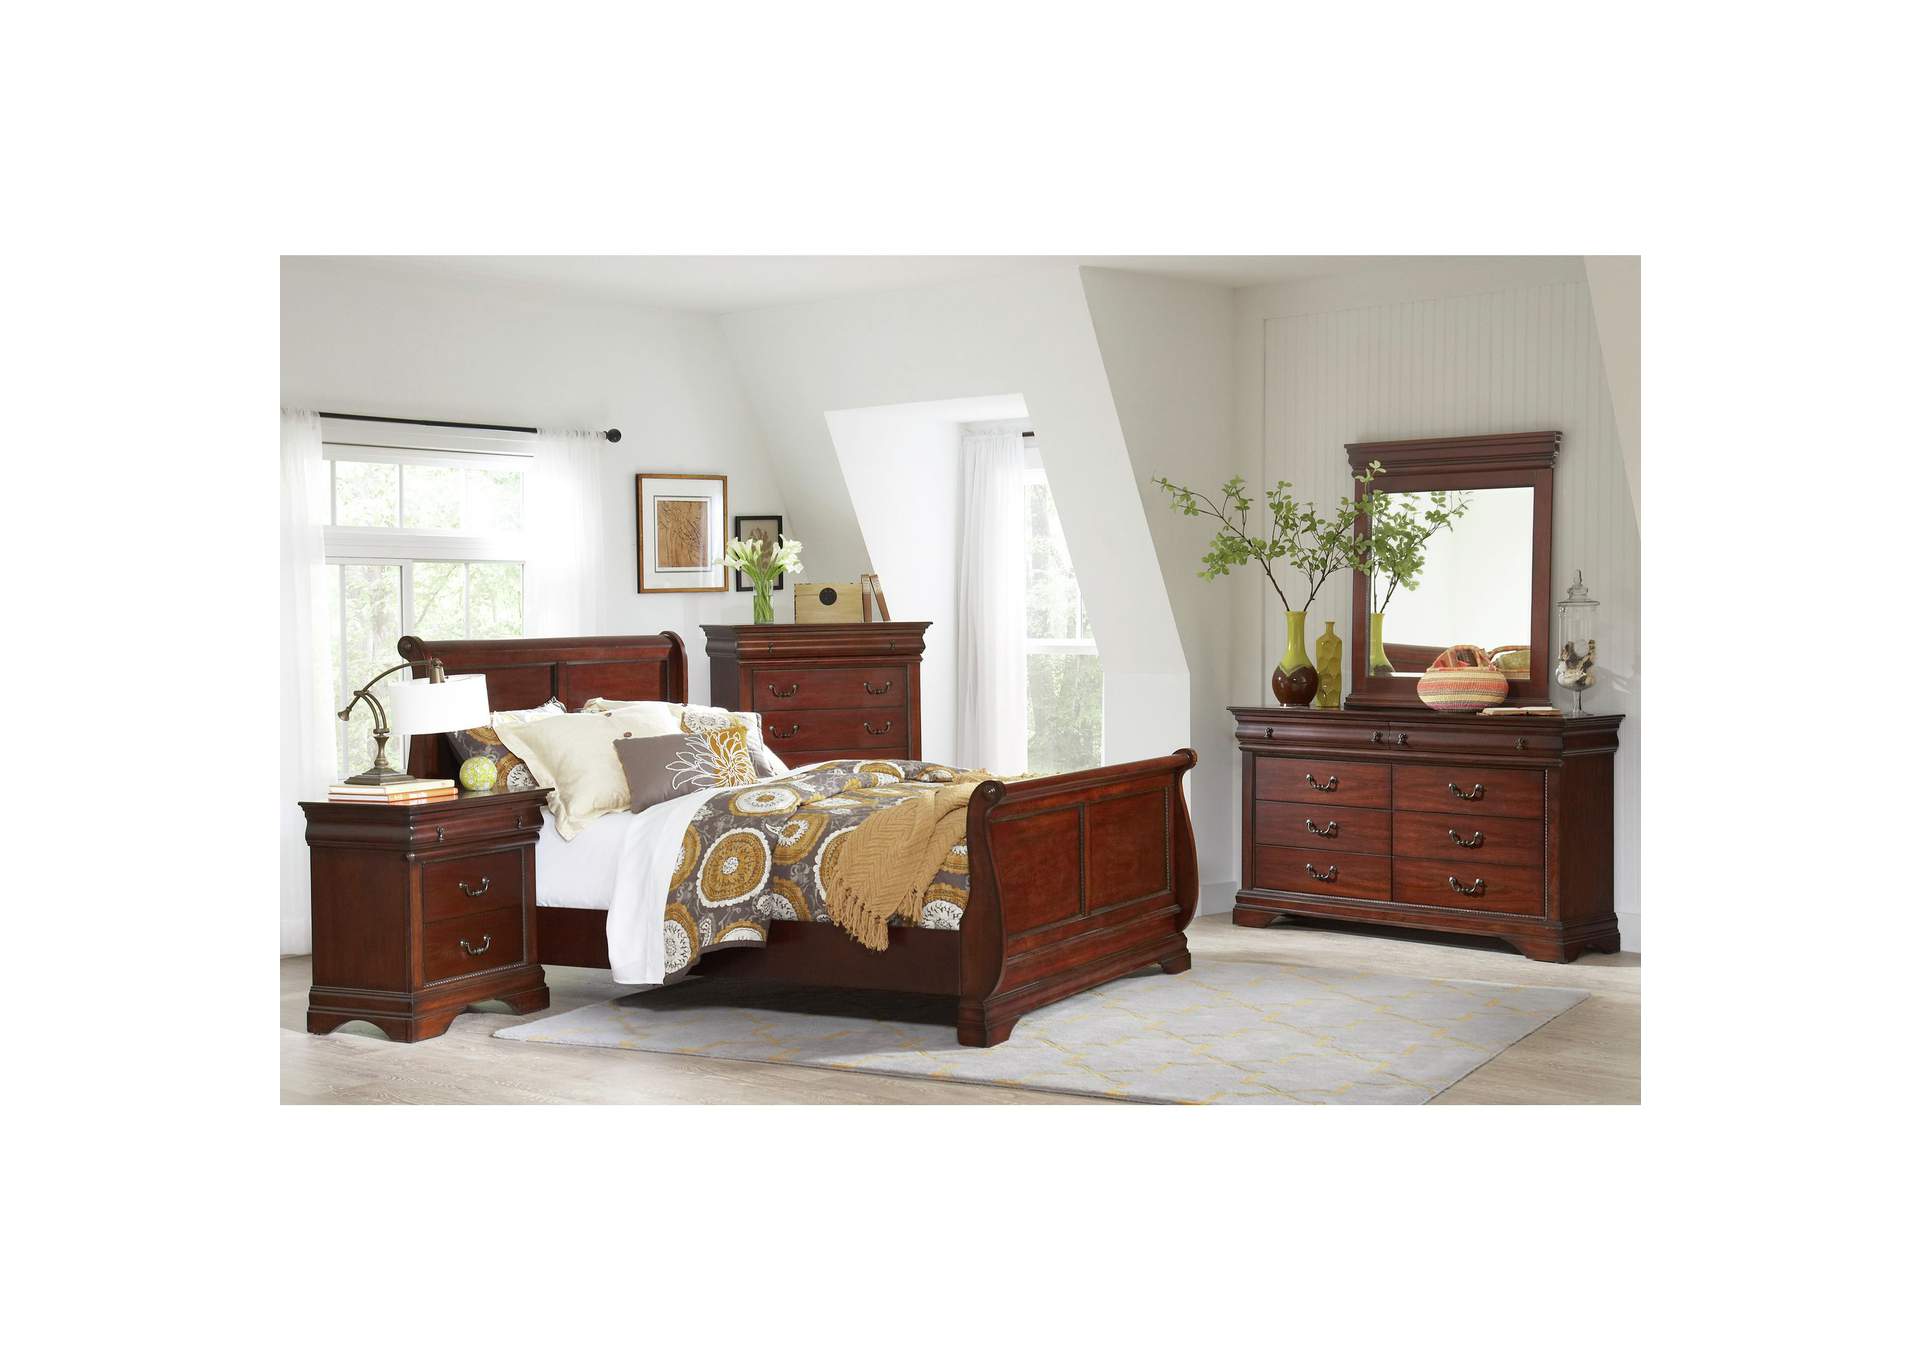 B4800 - 54F Chateau - Full Sleigh Bed - Vintage Cherry,Elements